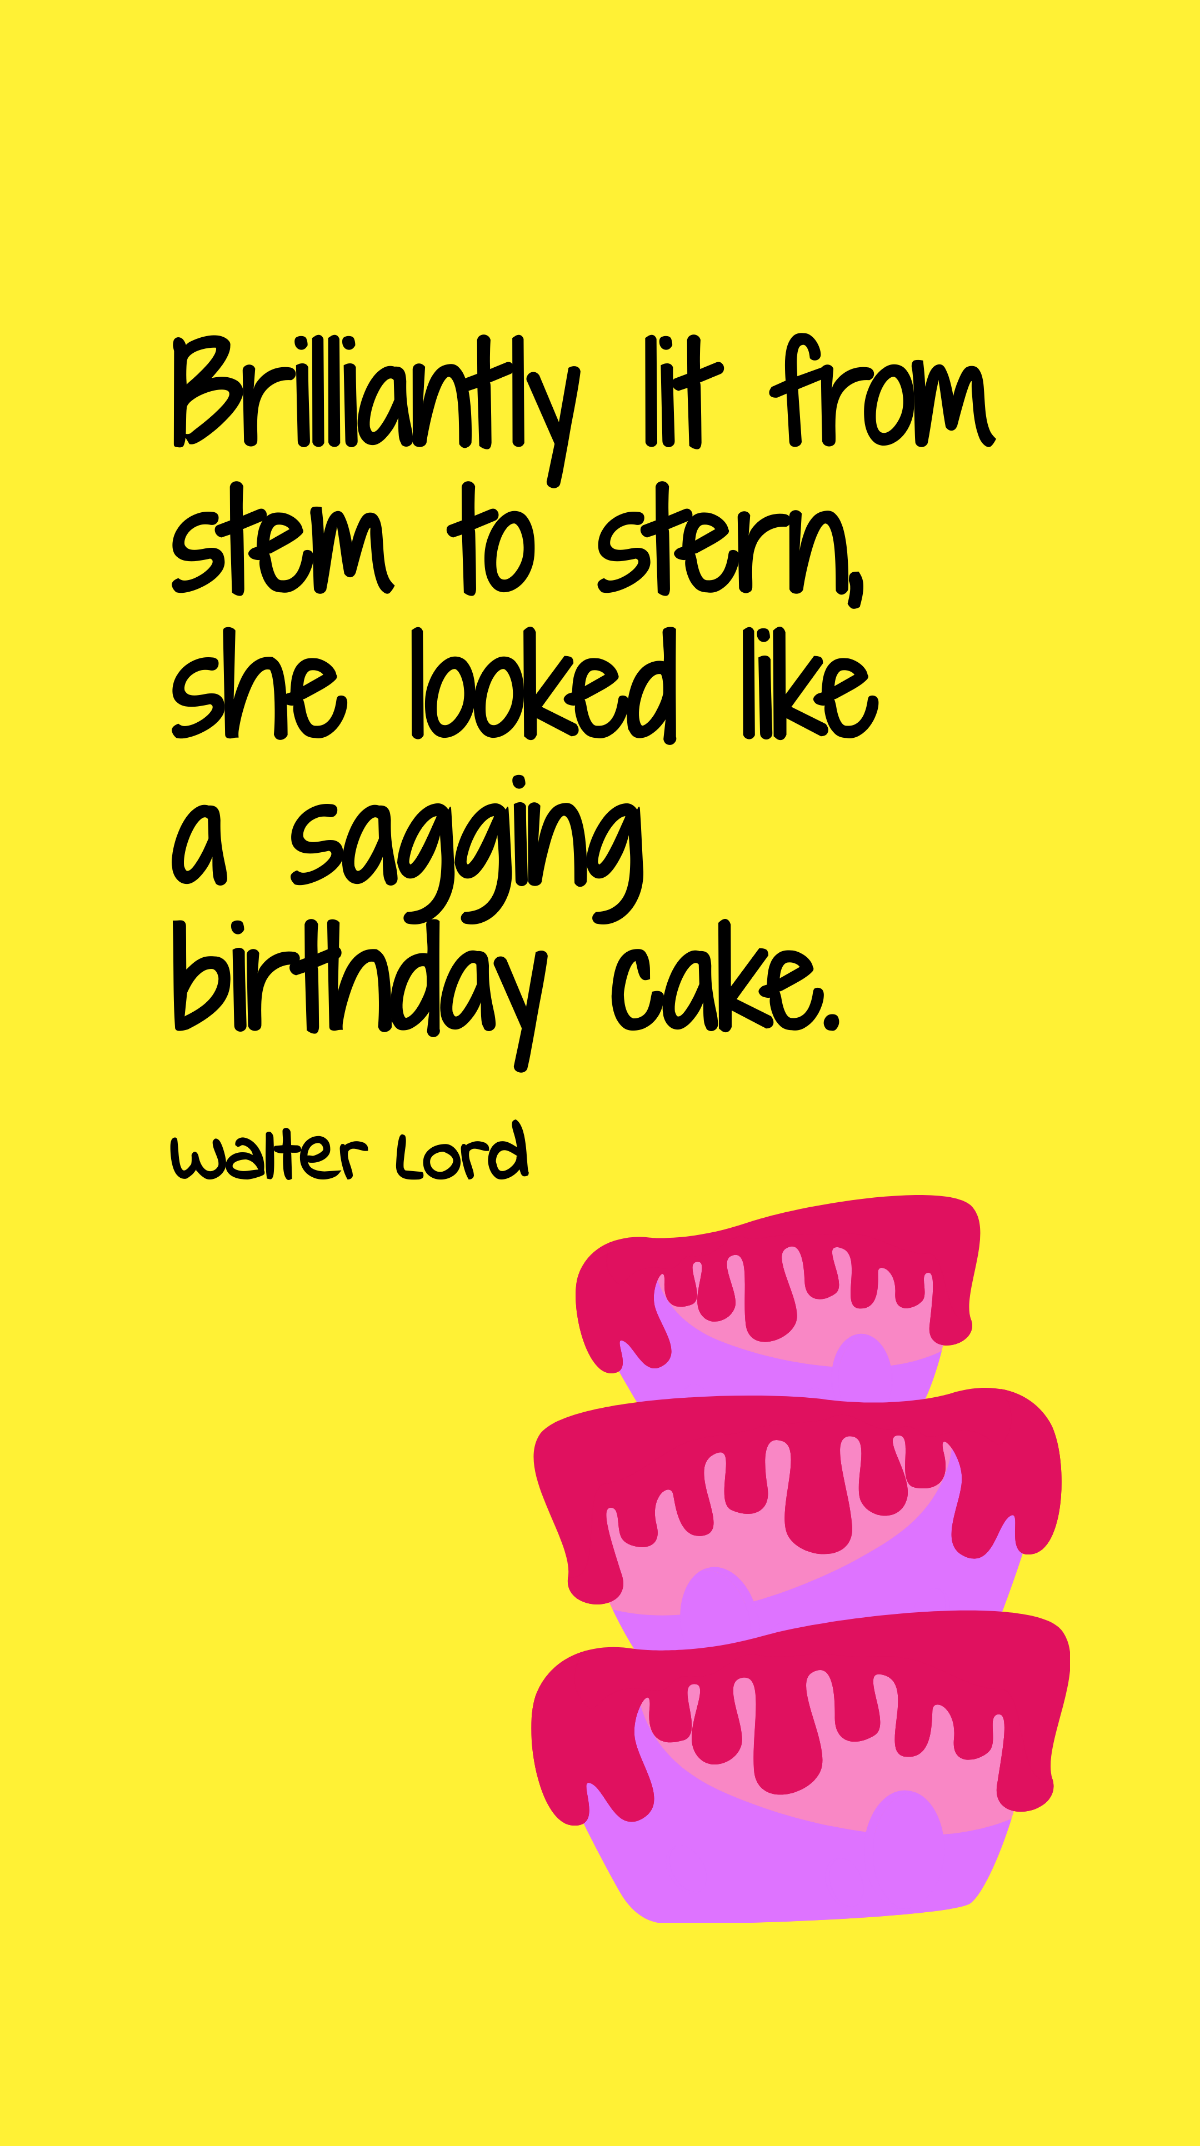 Walter Lord - Brilliantly lit from stem to stern, she looked like a sagging birthday cake. Template